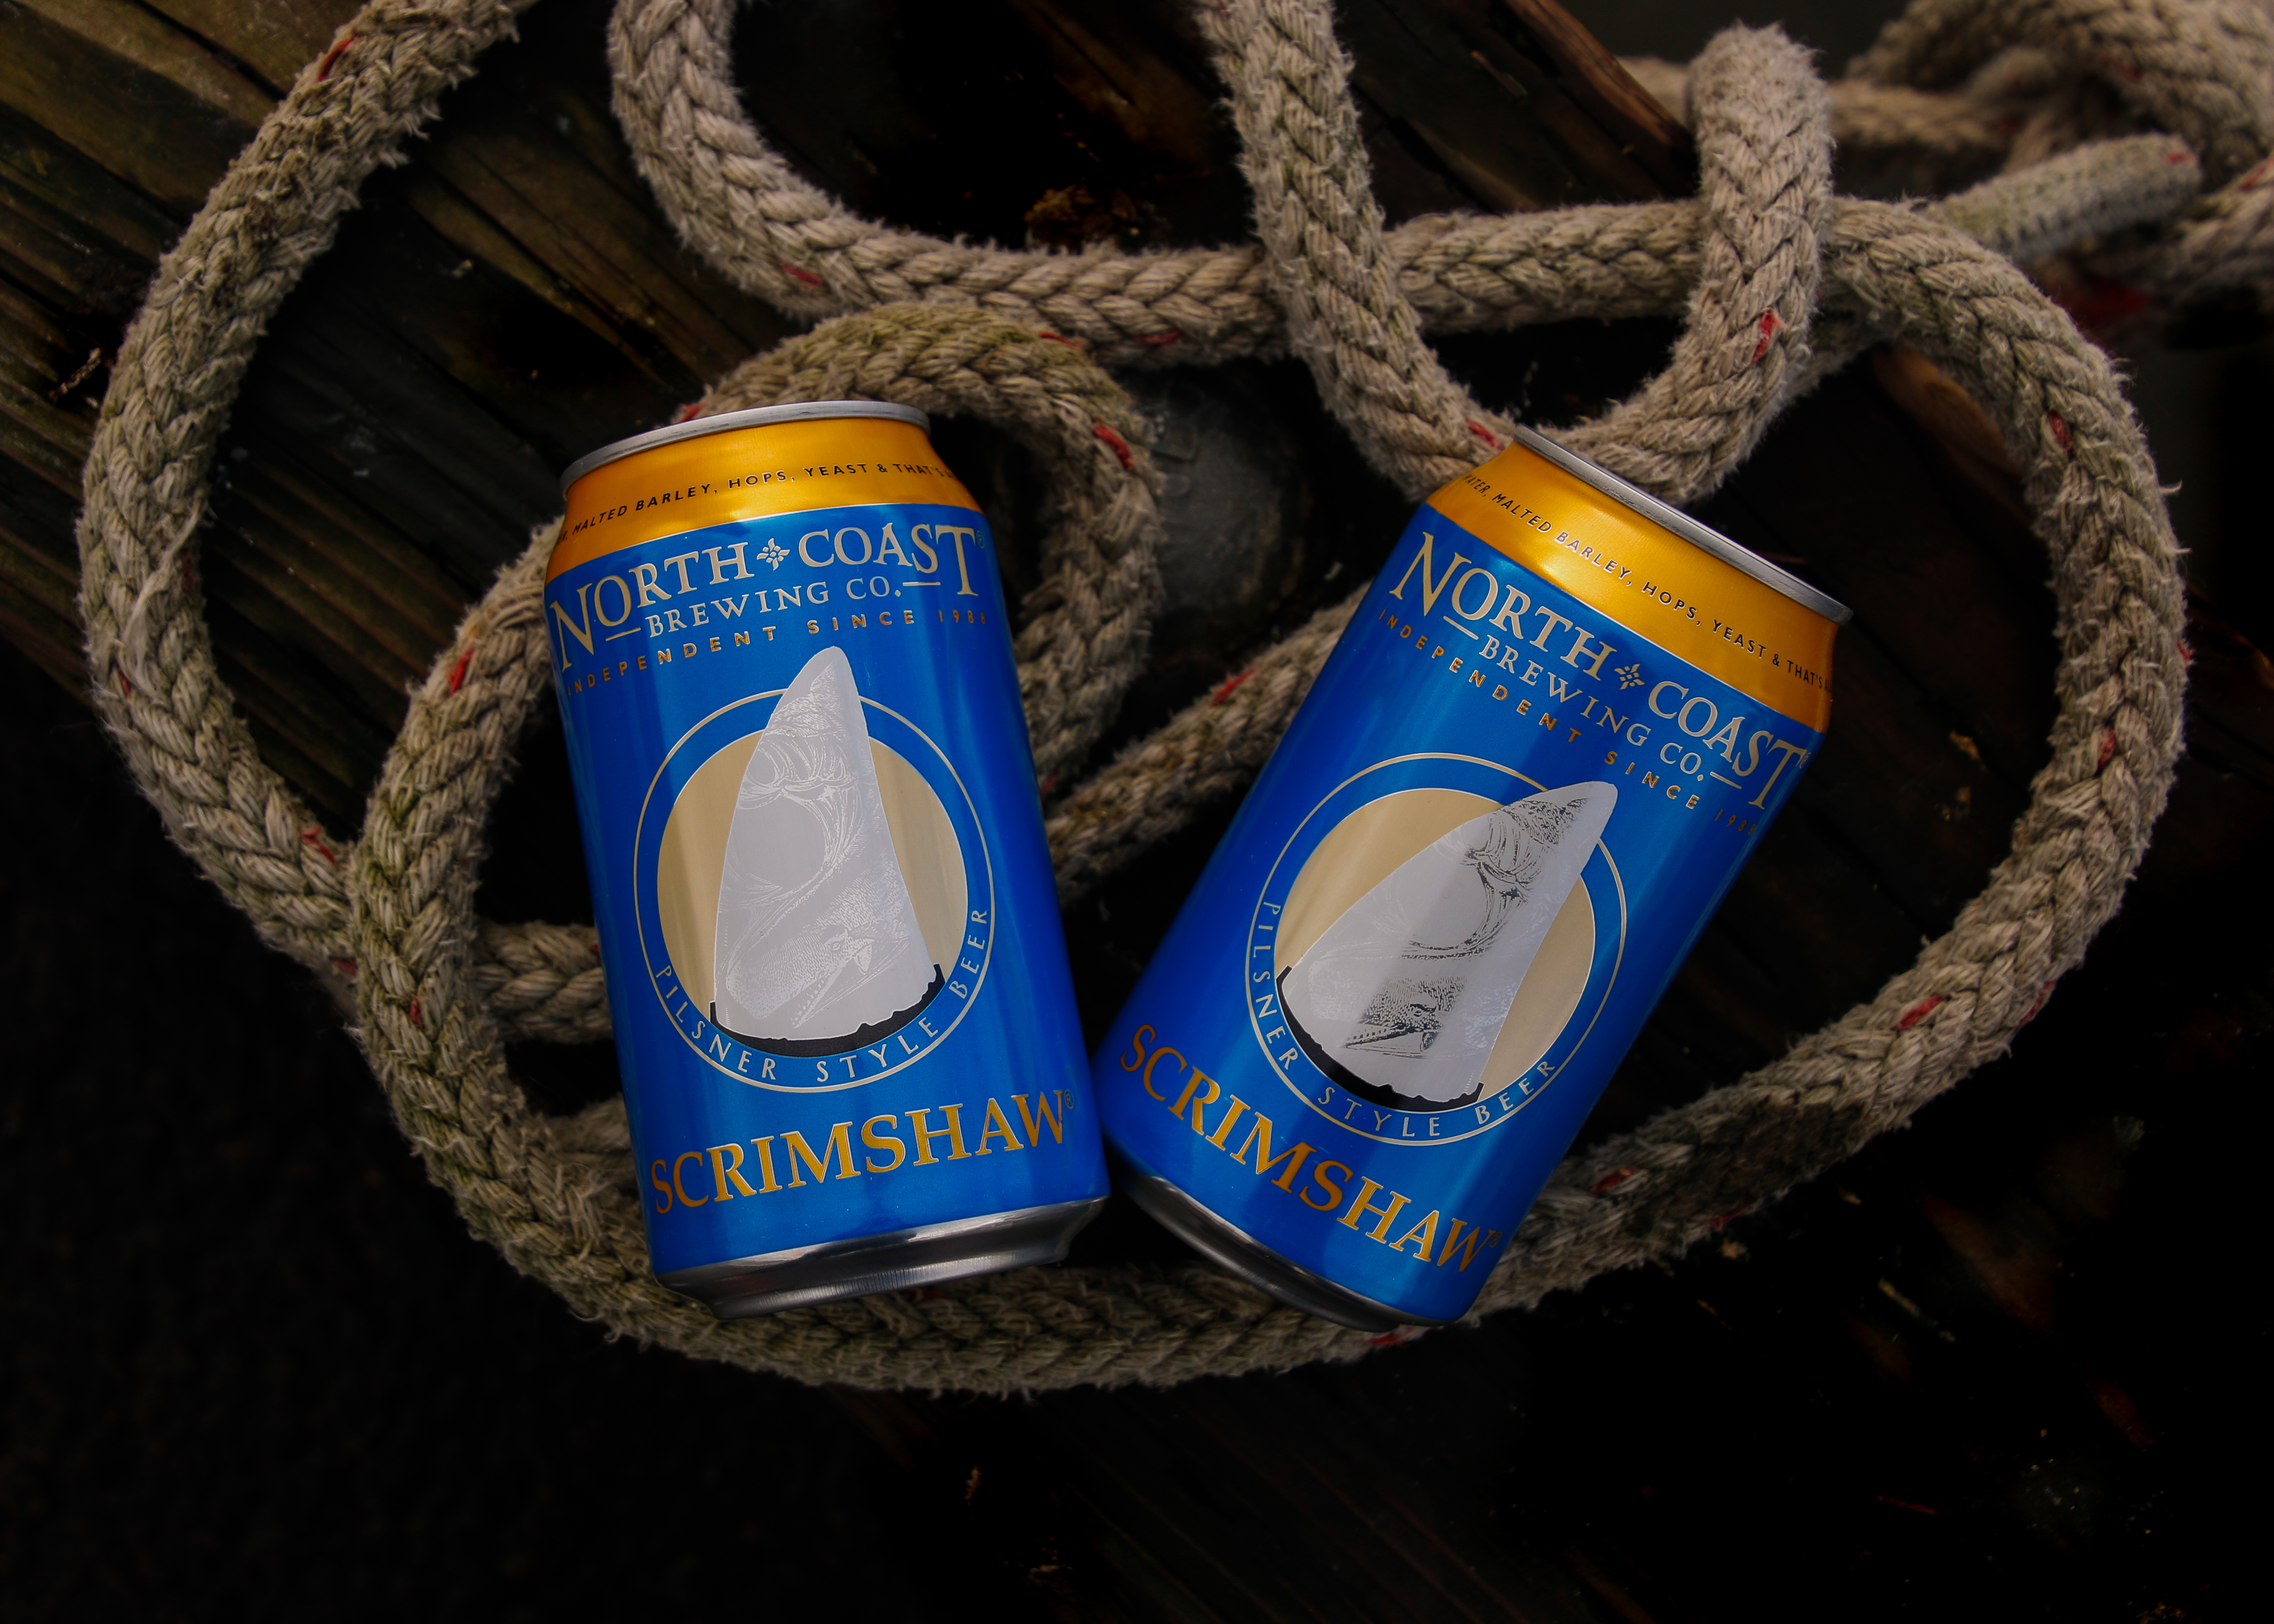 image of the new Scrimshaw cans courtesy of North Coast Brewing Company